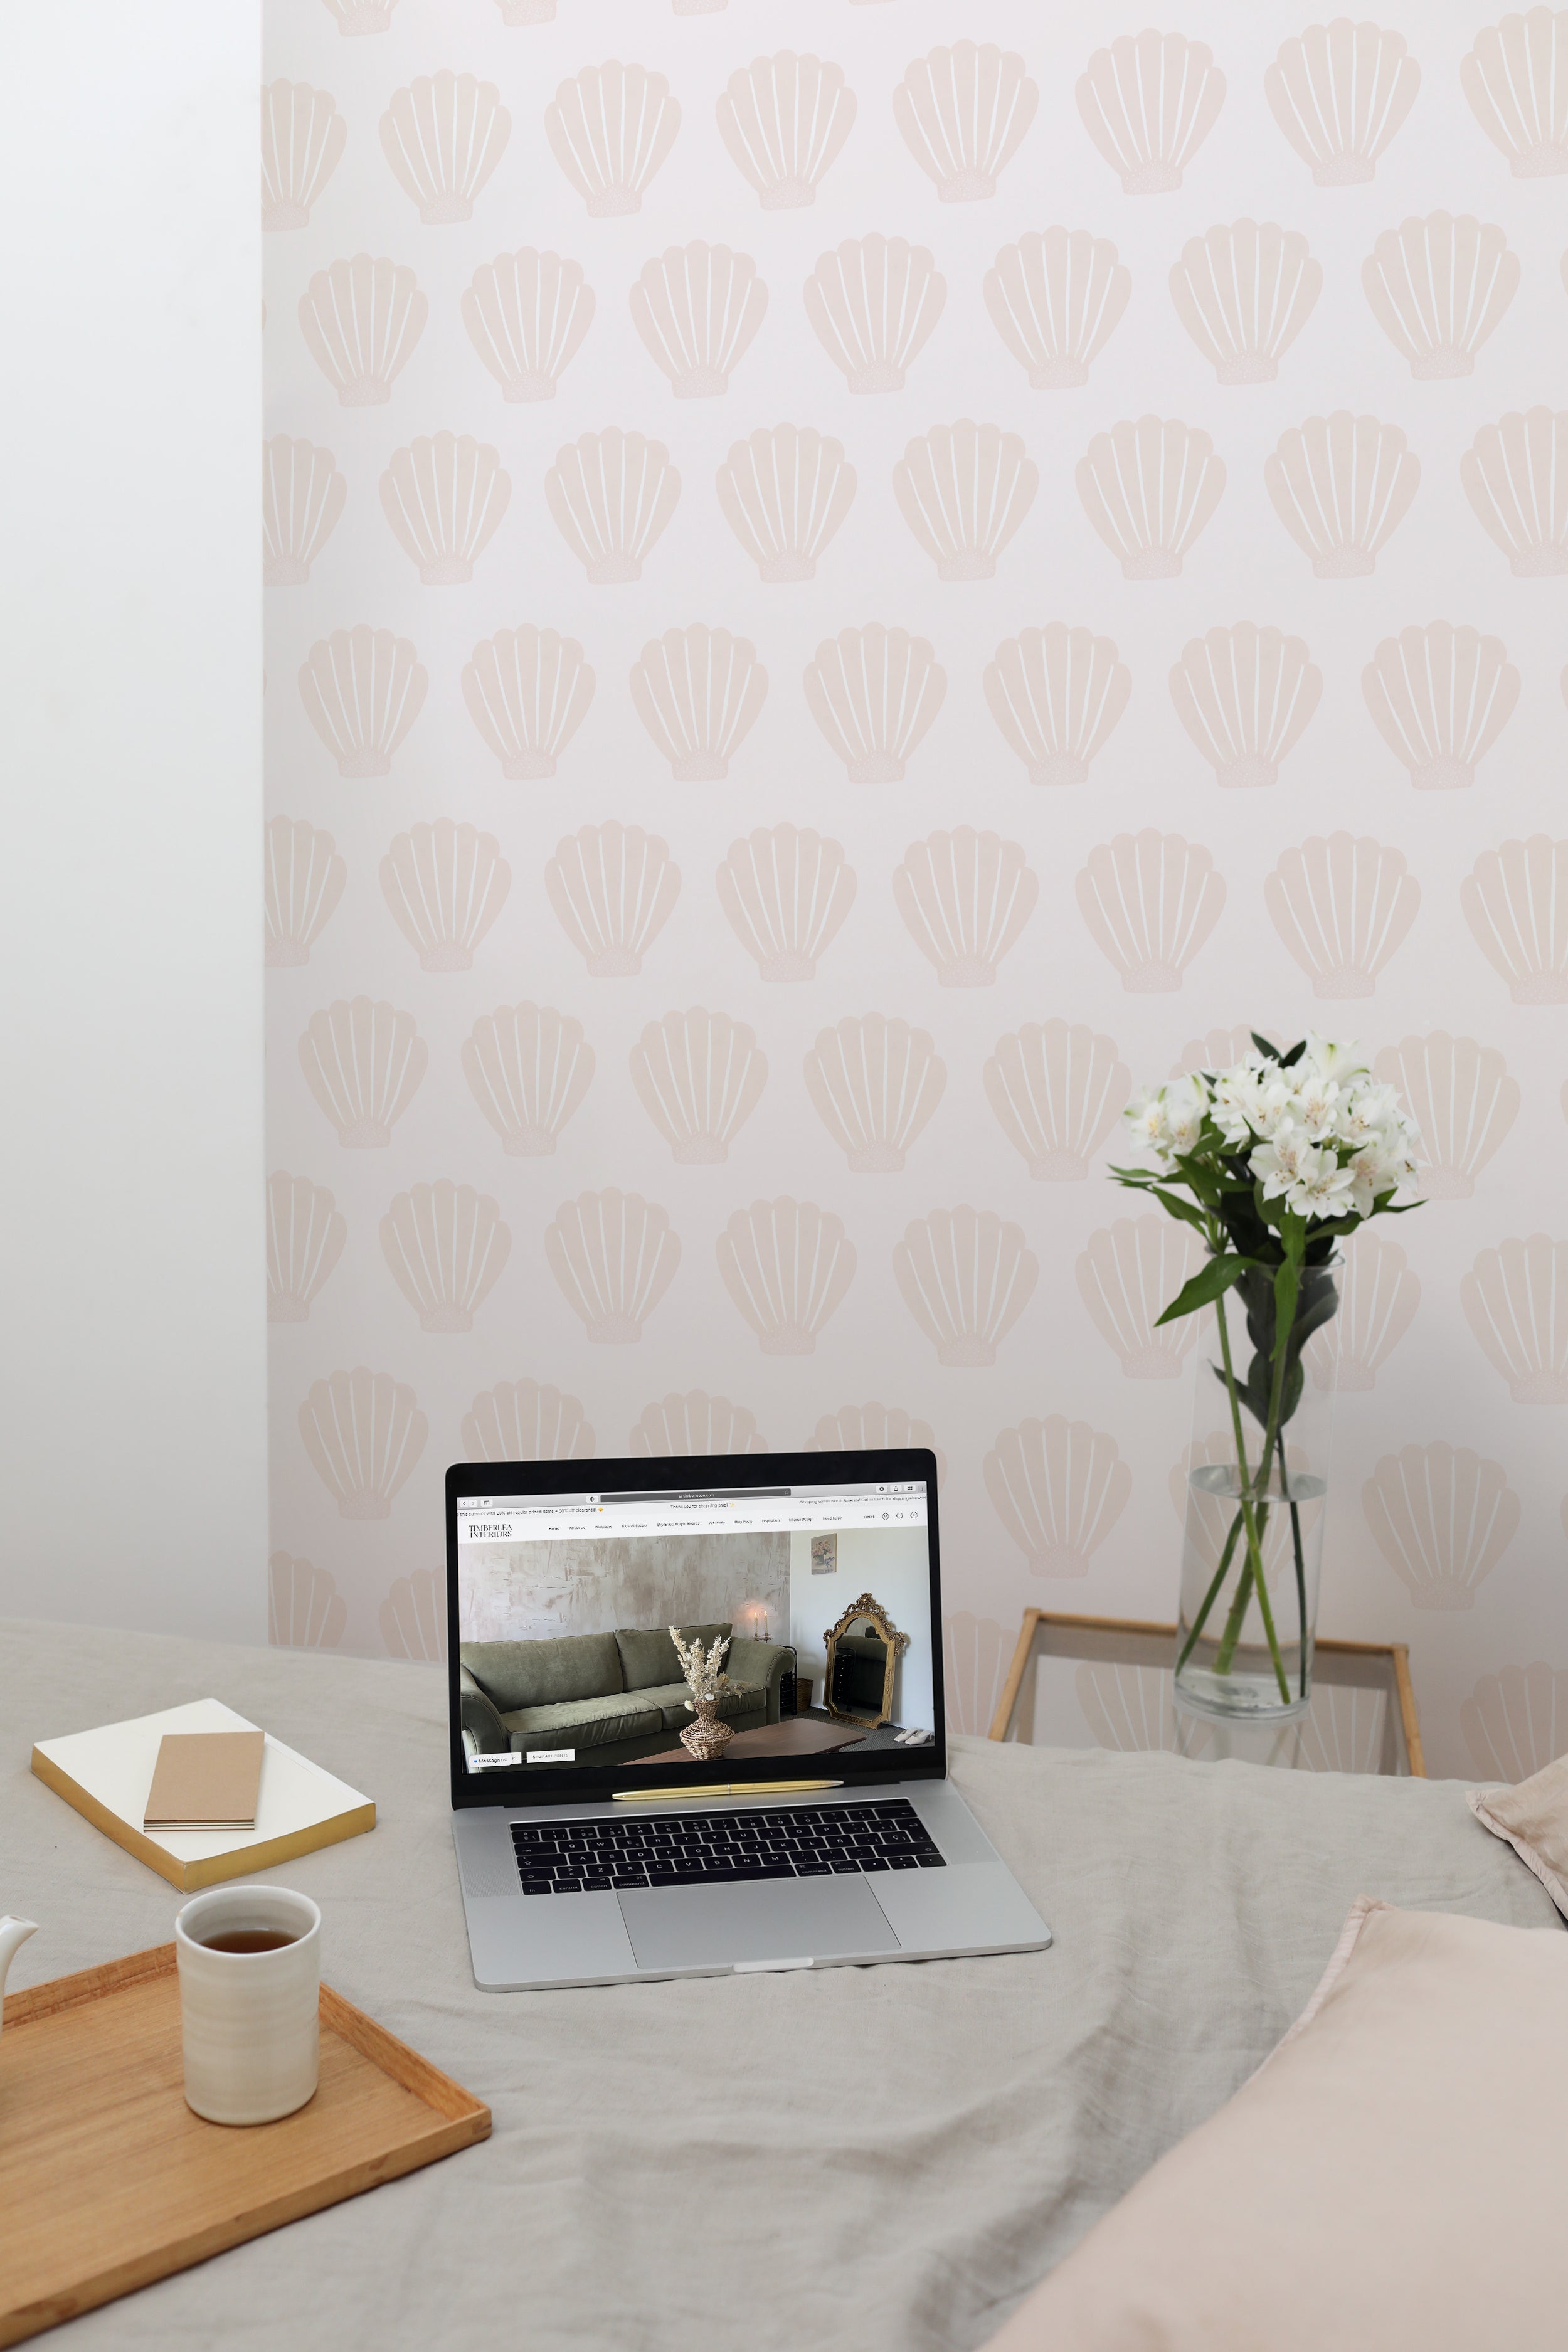 A home office setup with Mermaid Sea Shell wallpaper creating a calm and inviting workspace. The desk features a laptop, notebooks, and a vase of fresh flowers, enhancing productivity in a stylish environment